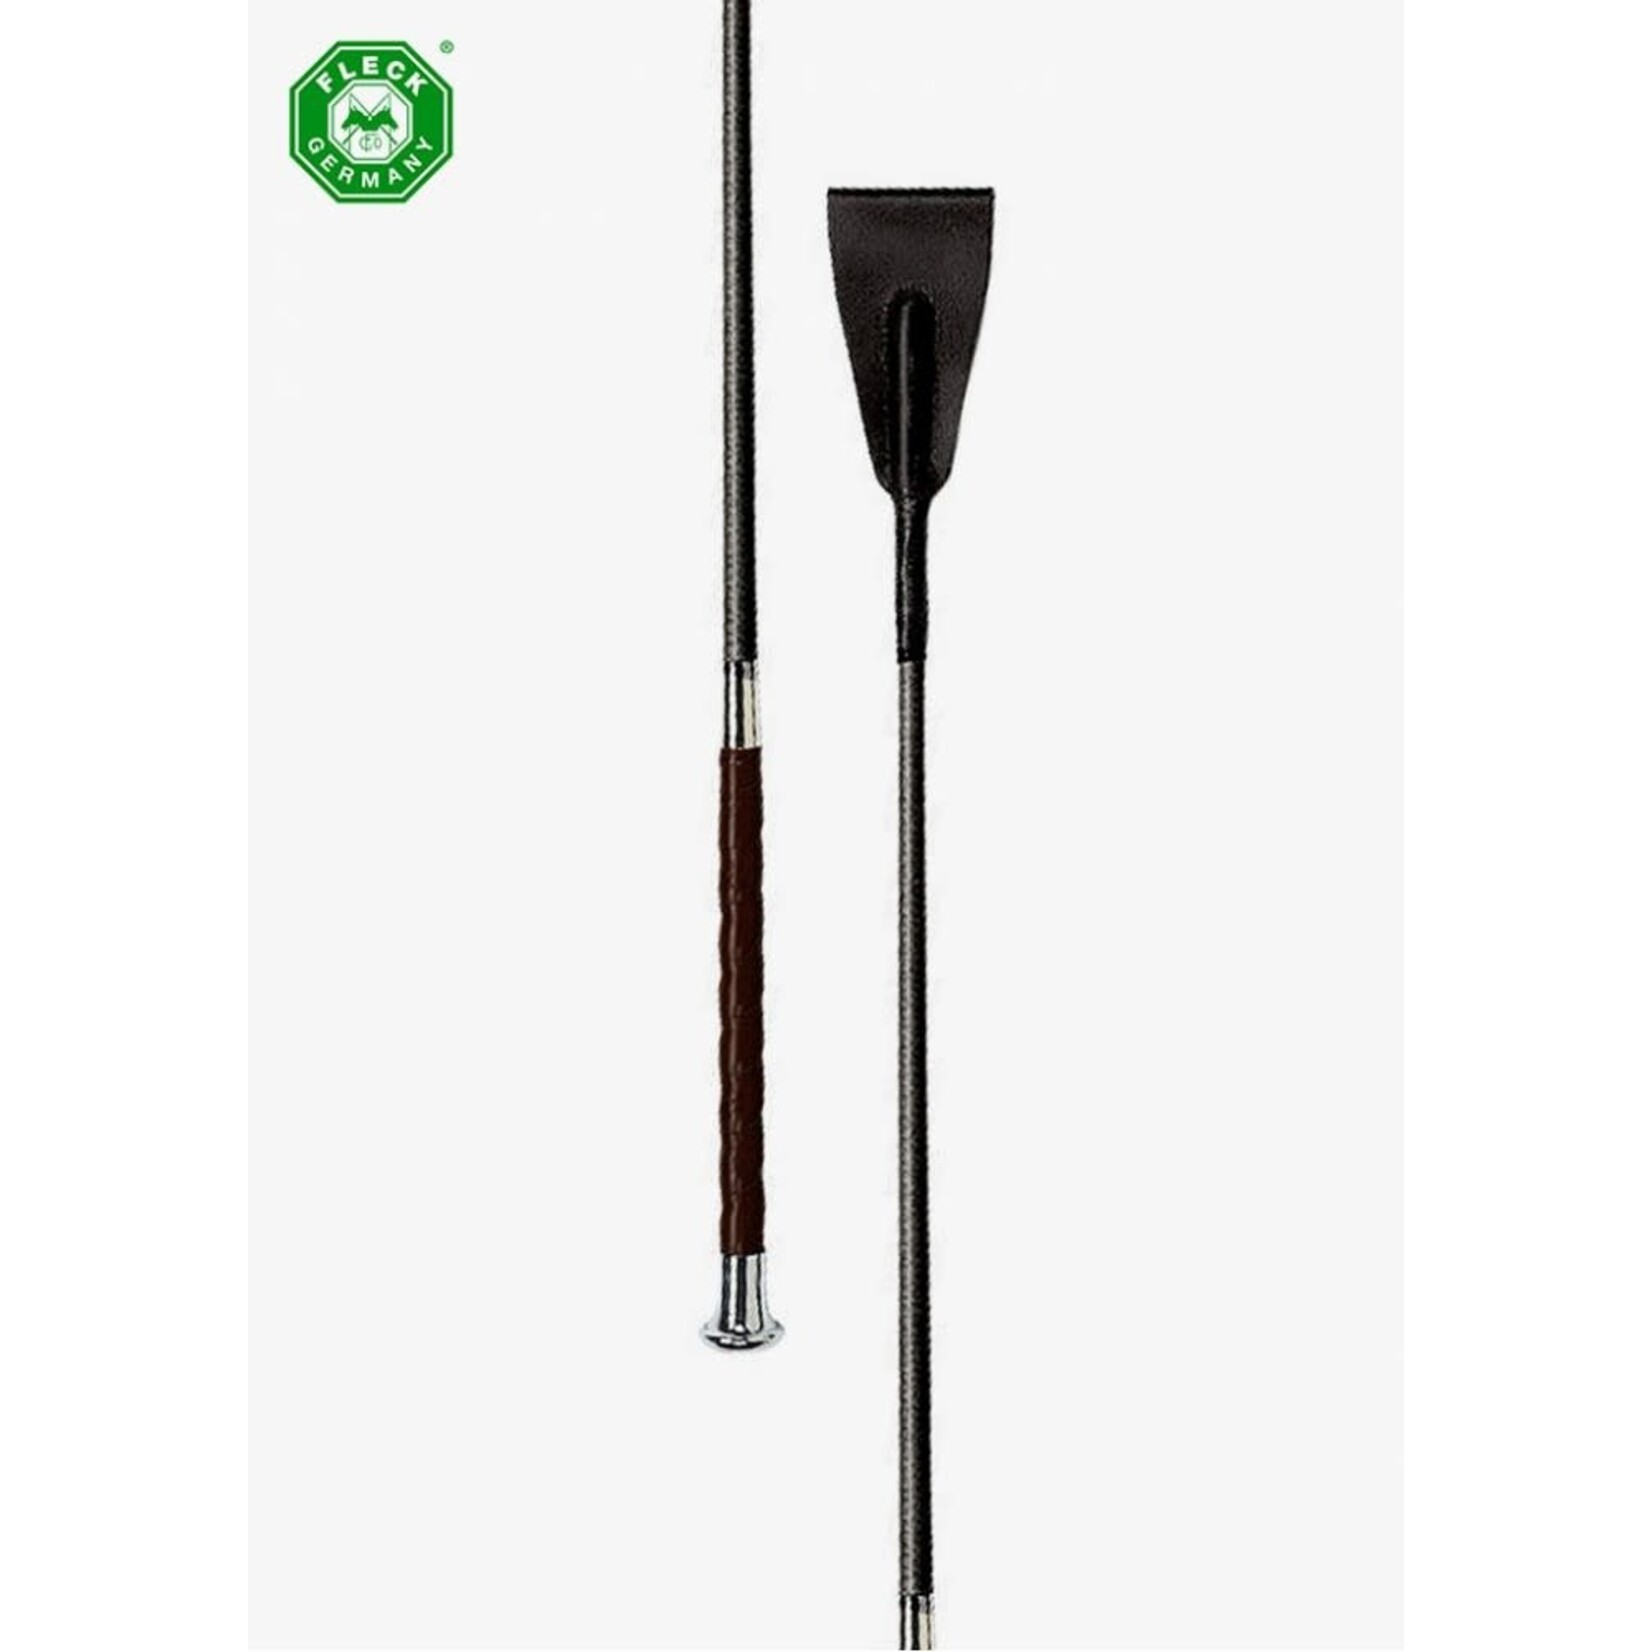 Fleck Woven Nylon Covered Stick With Wrapped Leather Handle, Nickel Cap